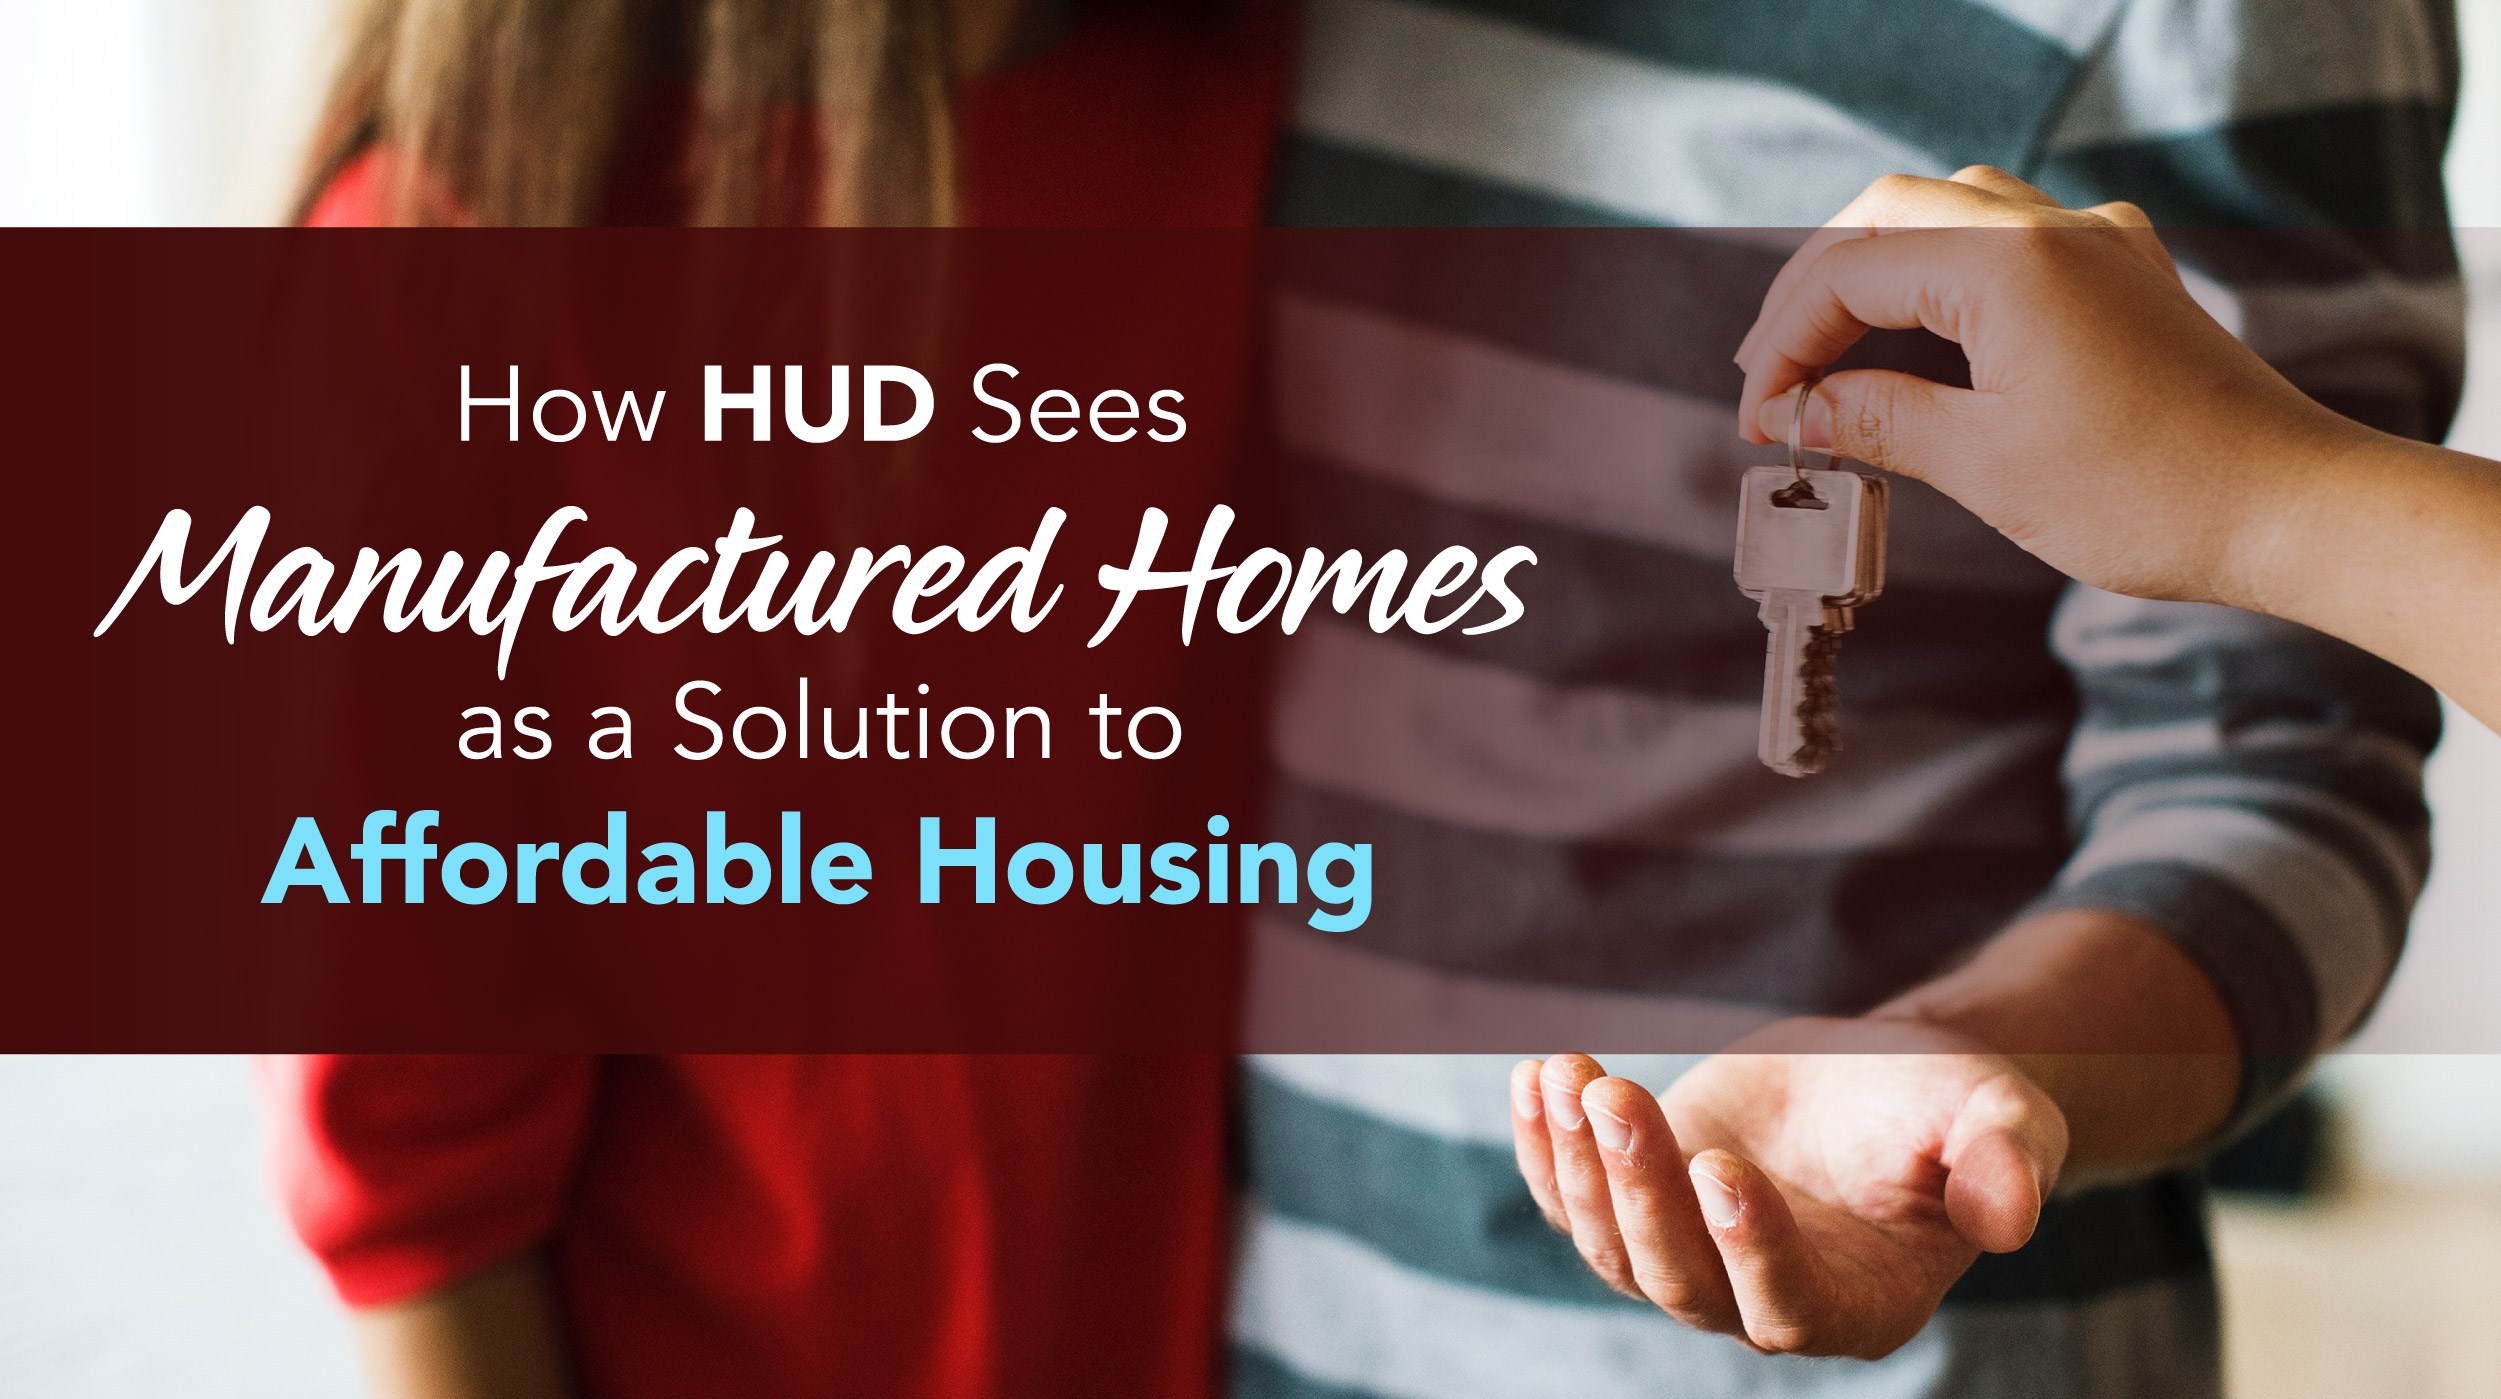 HUD Sees Manufactured Homes as a Solution to Affordable Housing